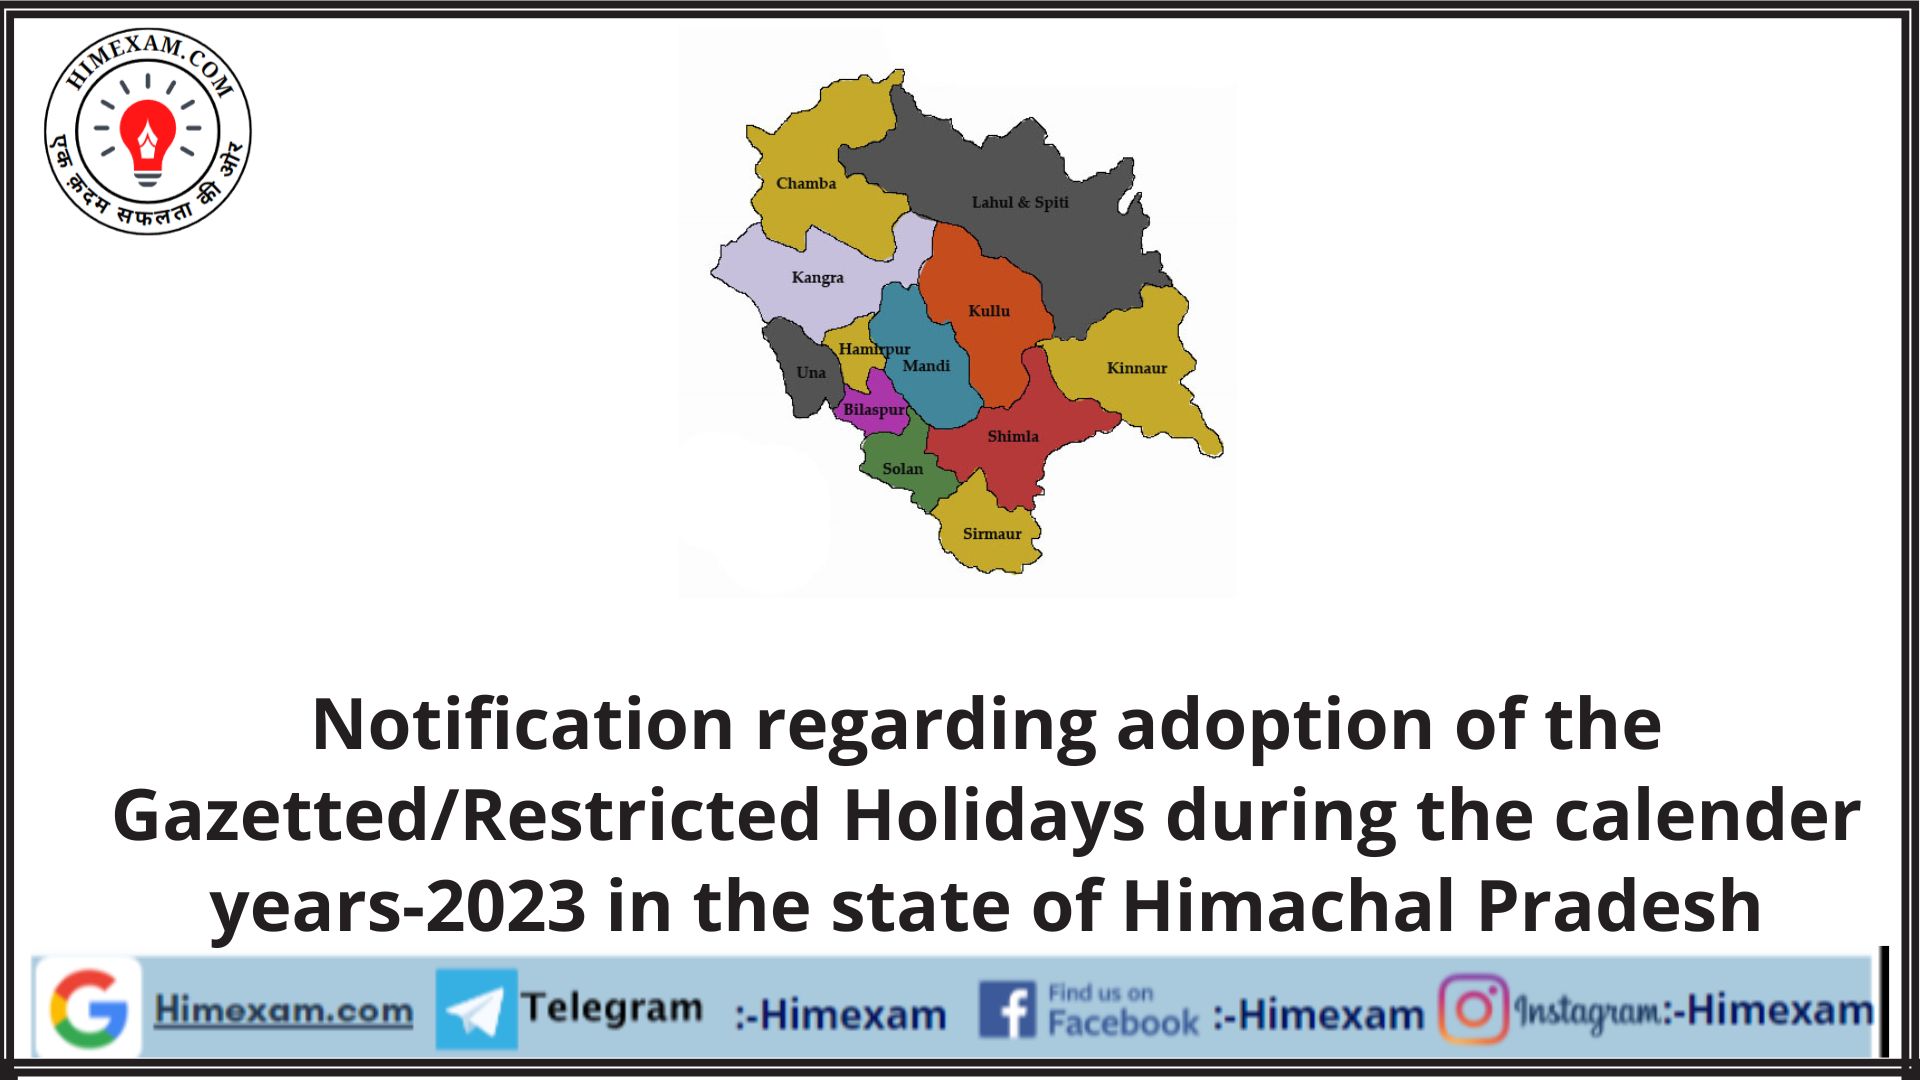 Notification regarding adoption of the Gazetted/Restricted Holidays during the calender years-2023 in the state of Himachal Pradesh